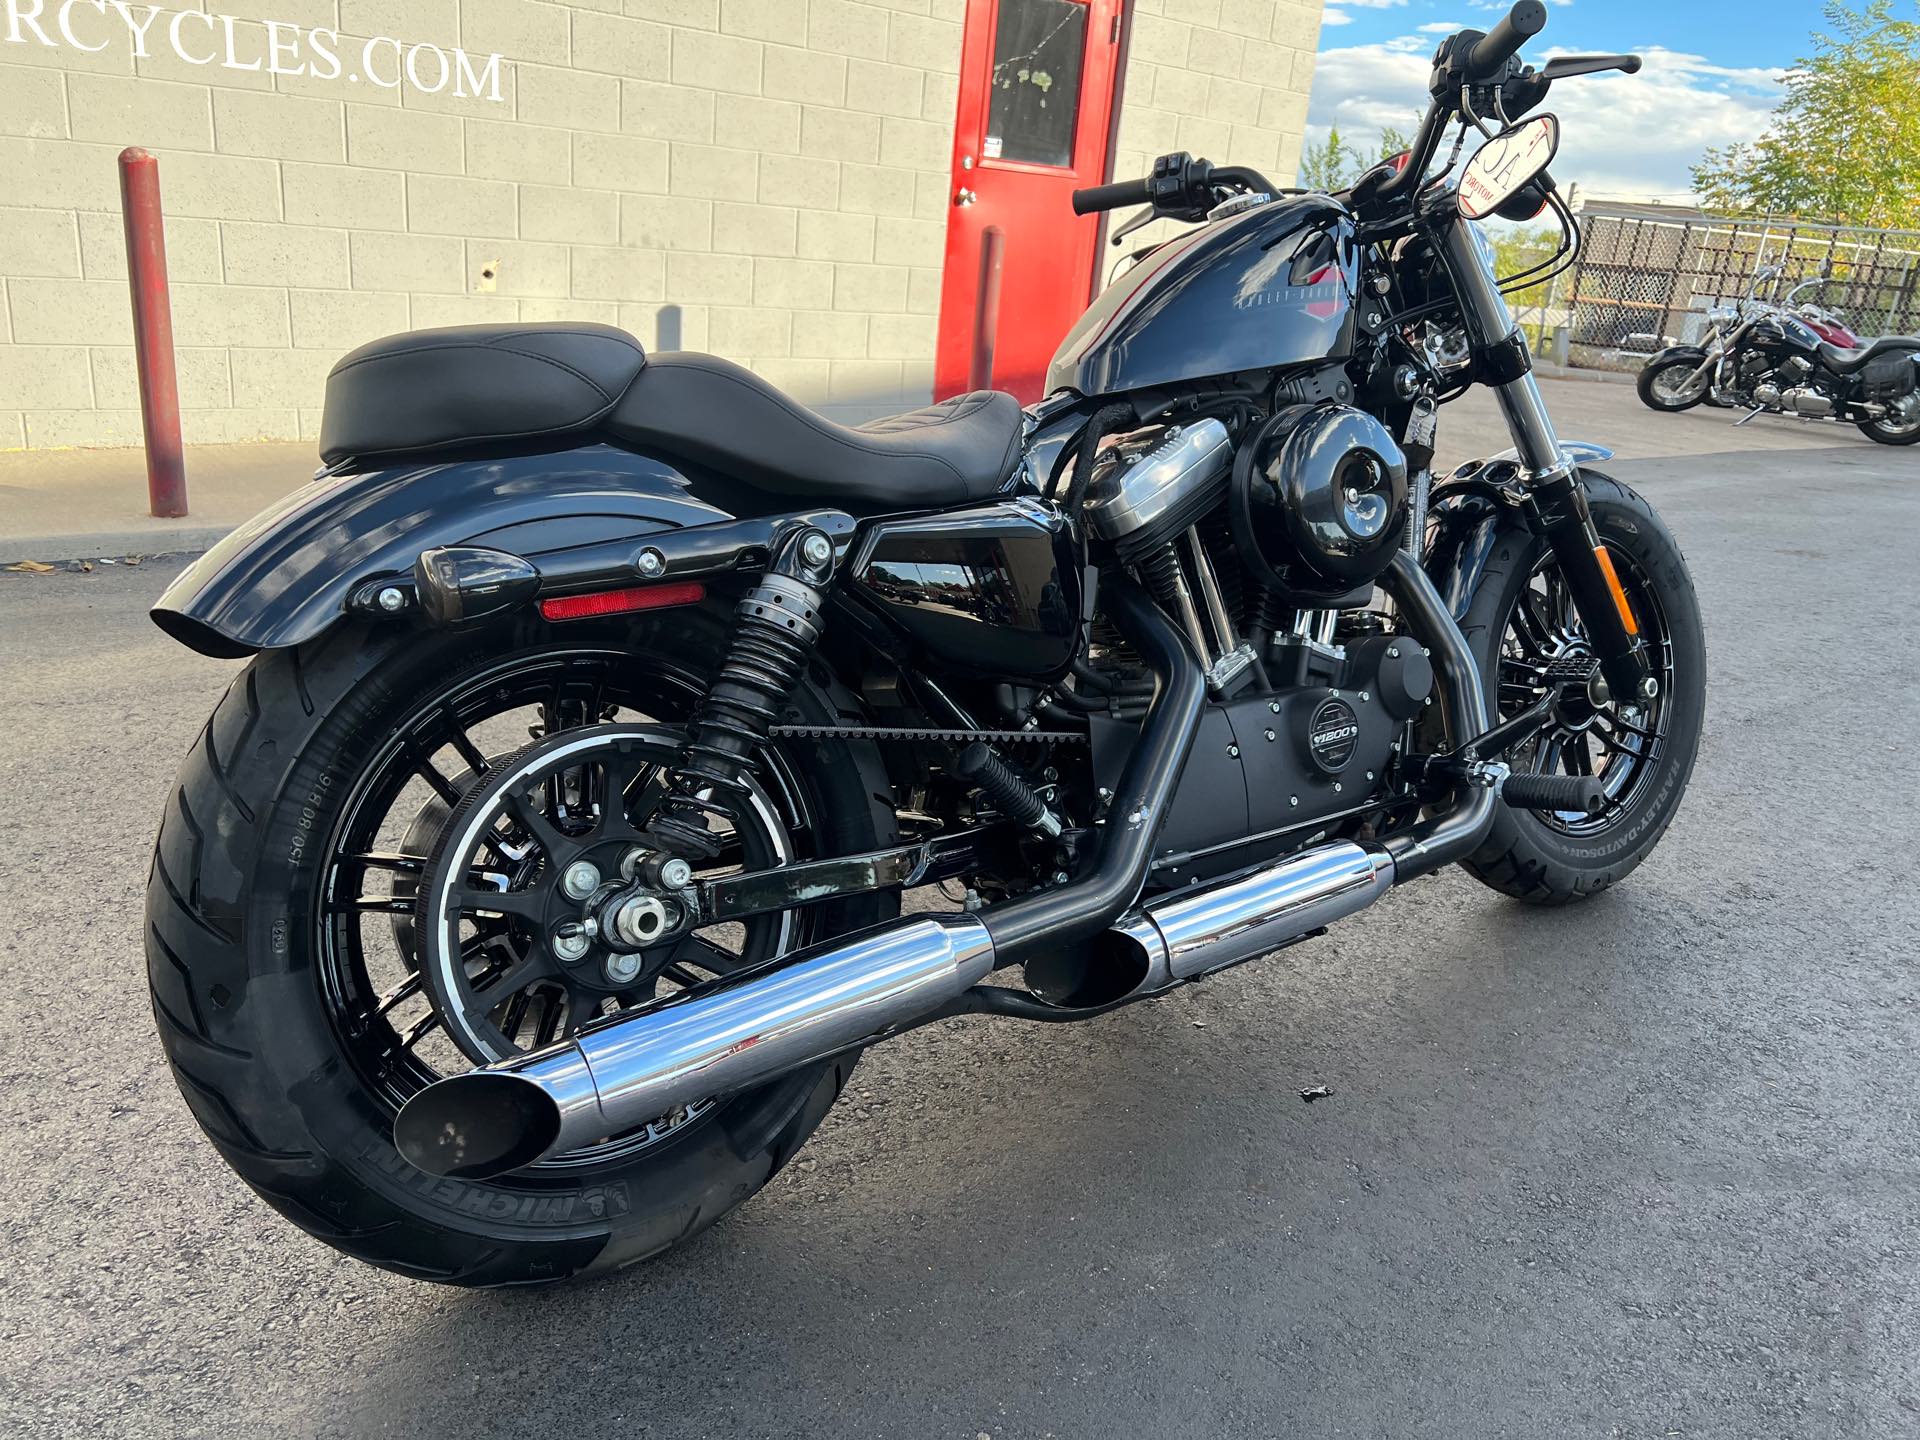 2021 Harley-Davidson Cruiser XL 1200X Forty-Eight at Aces Motorcycles - Fort Collins